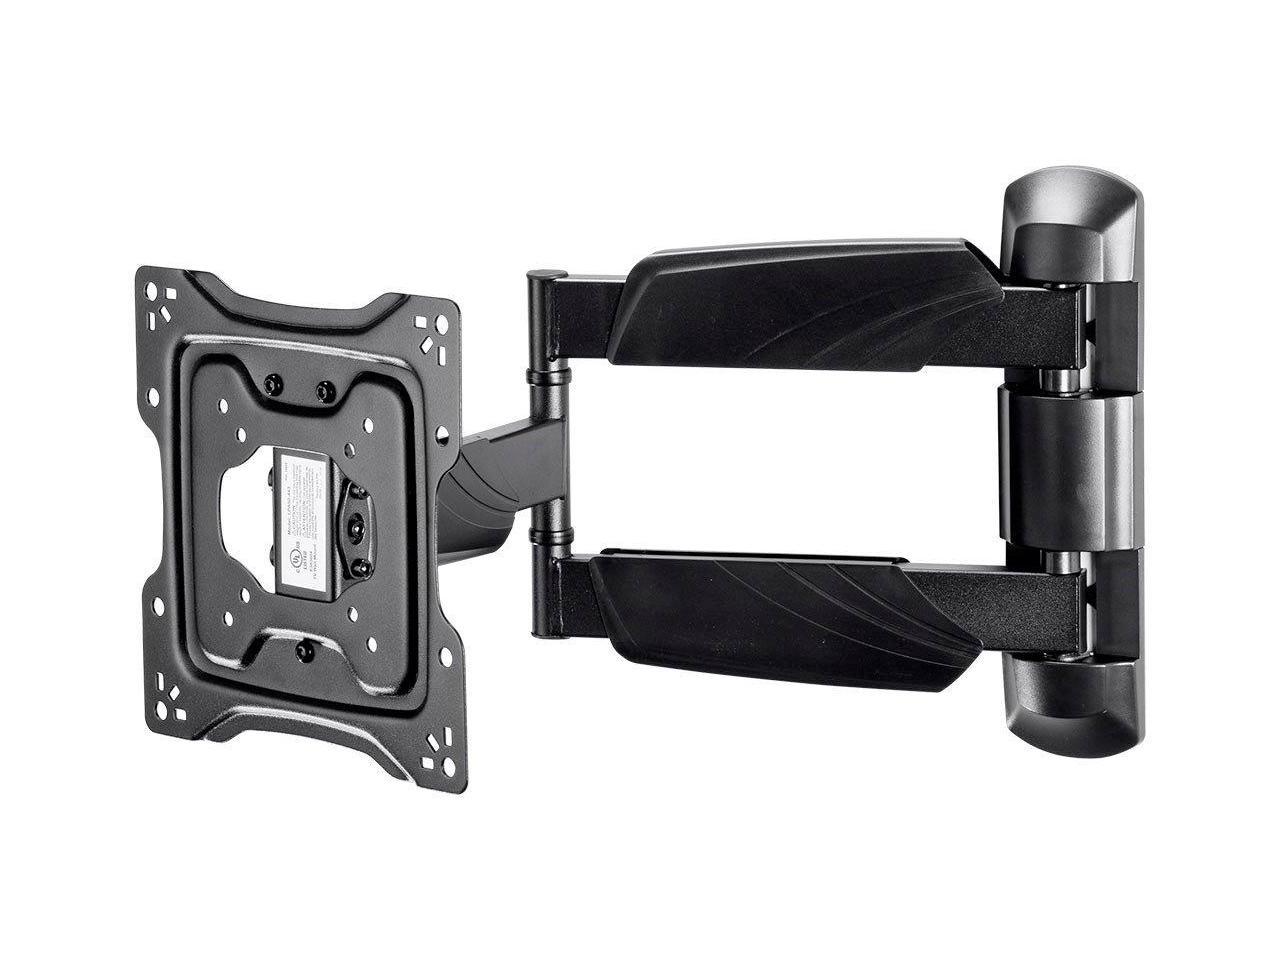 Monoprice Full-Motion Articulating TV Wall Mount Bracket - For LED TVs 24in to 55in, Max Weight 77 Lbs., VESA Patterns Up to 400x400, Rotating, Low Profile, UL Certified - Commercial Series - image 3 of 20